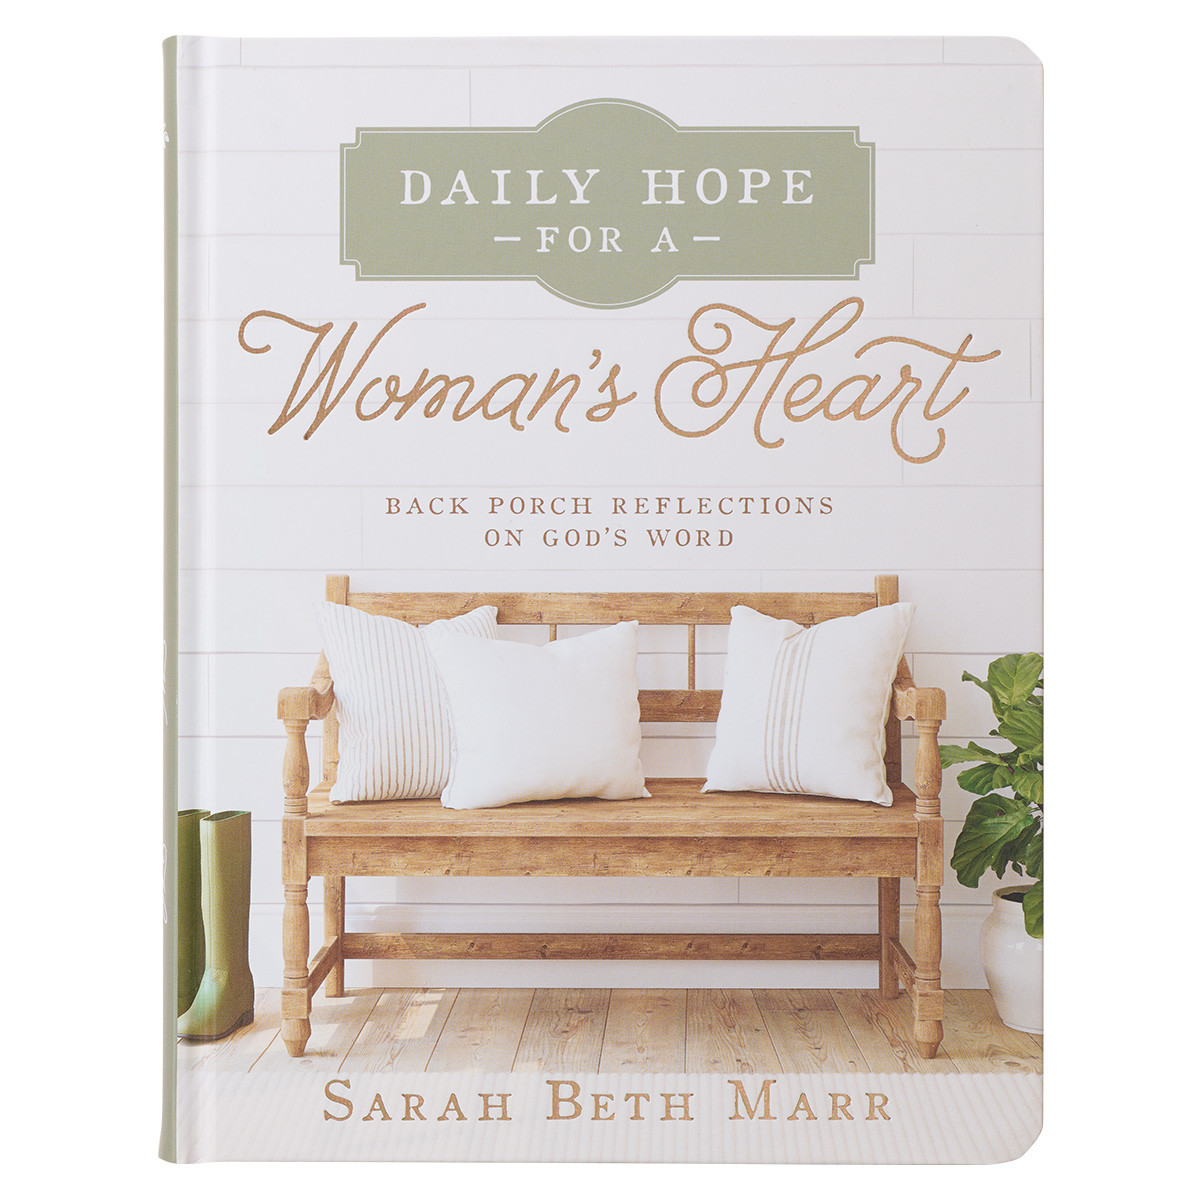 "Daily Hope for a Woman's Heart" by Sarah Beth Marr